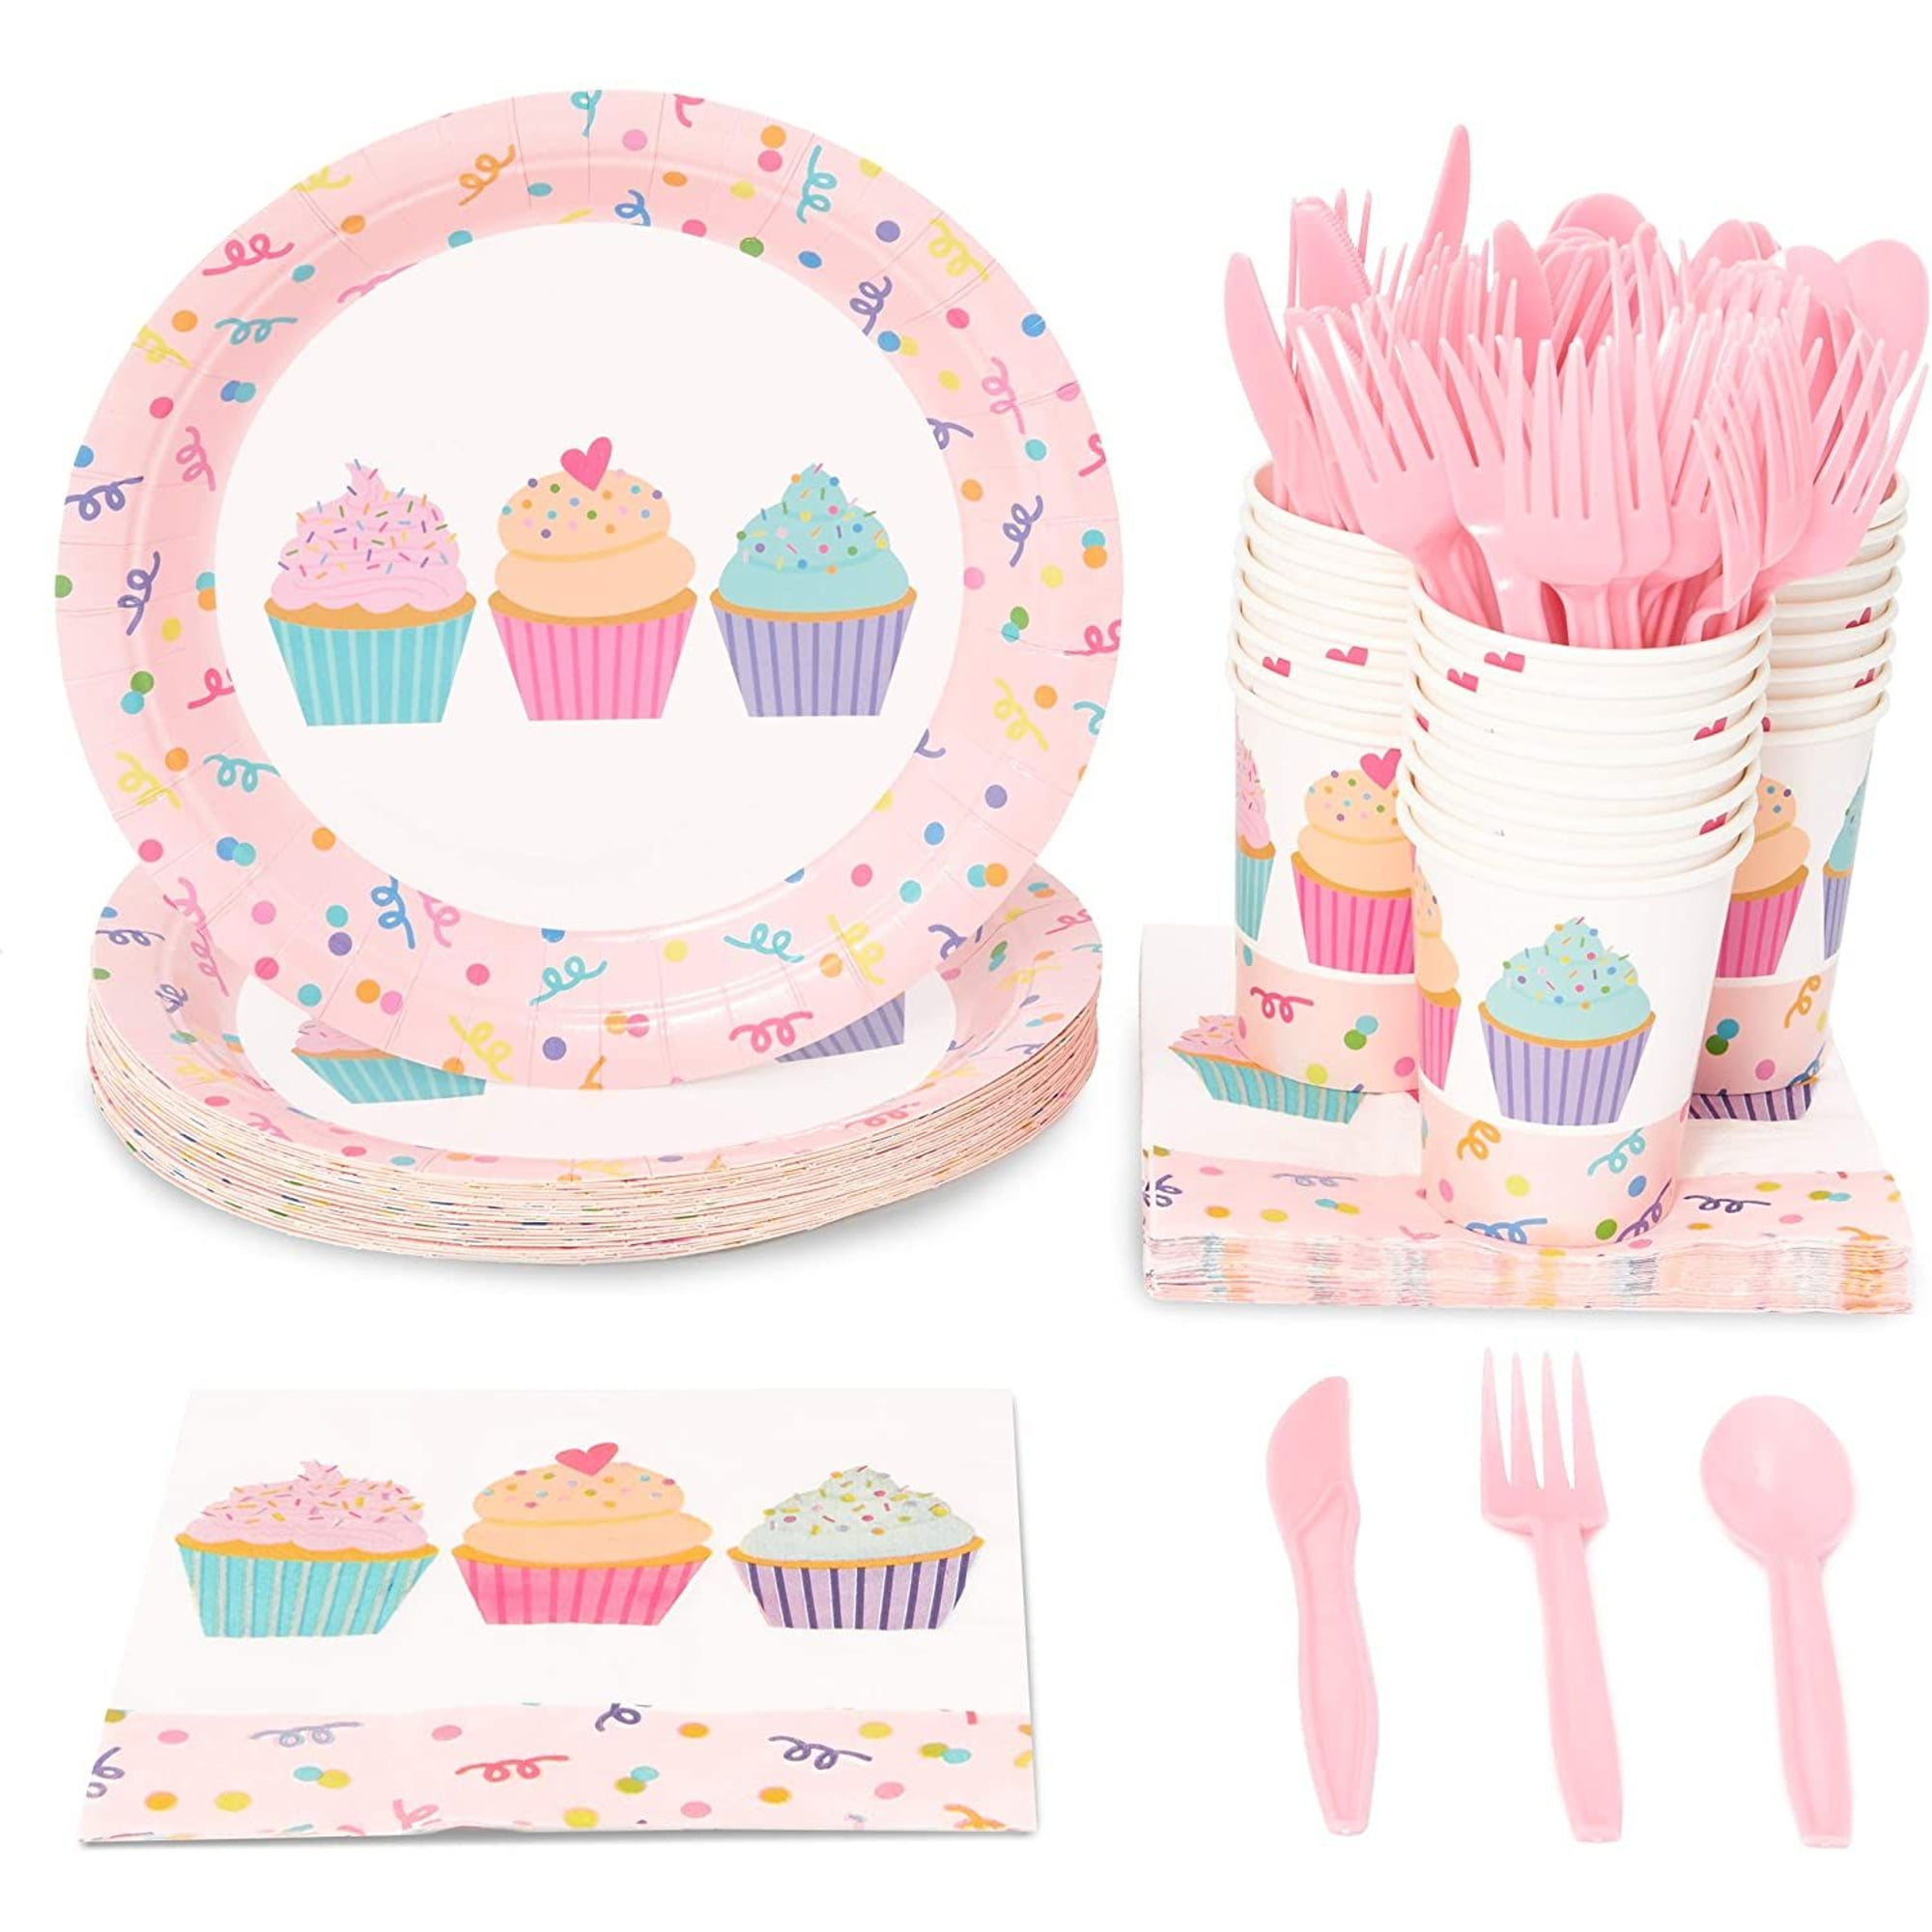 121 Pc Hot Pink Party Decorations Disposable Tableware Set Serves 24  Plates, Cups, Napkins, Tablecloth, Straws Party Supplies for Birthday